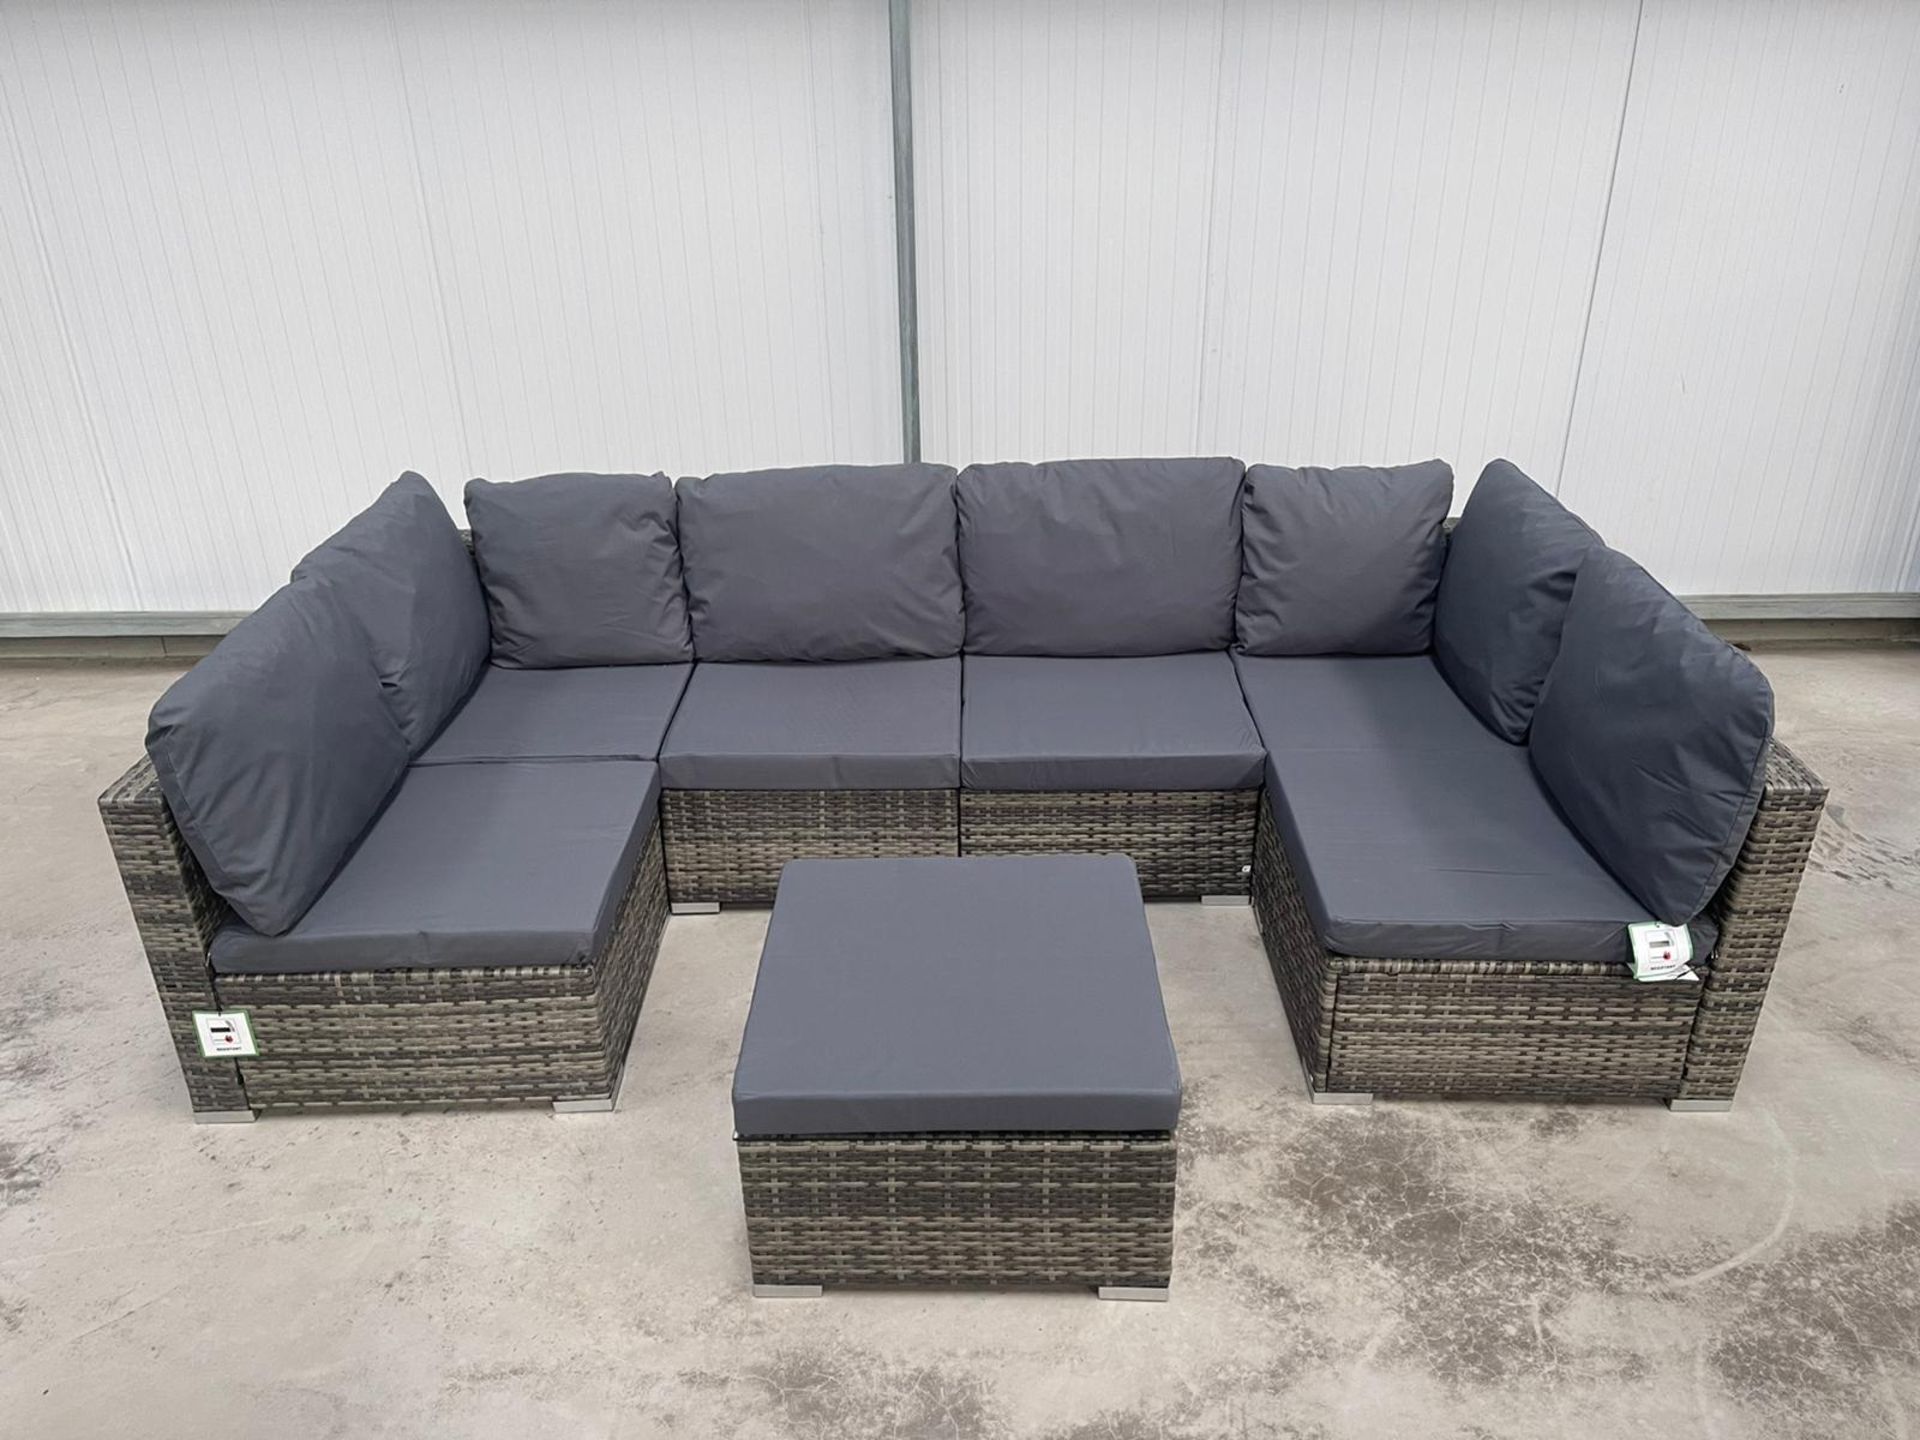 RRP £899 - NEW GREY U-SHAPED MODULAR SOFA WITH GLASS TOPPED COFFEE TABLE. VERY VERSITILE SET THAT - Image 2 of 9